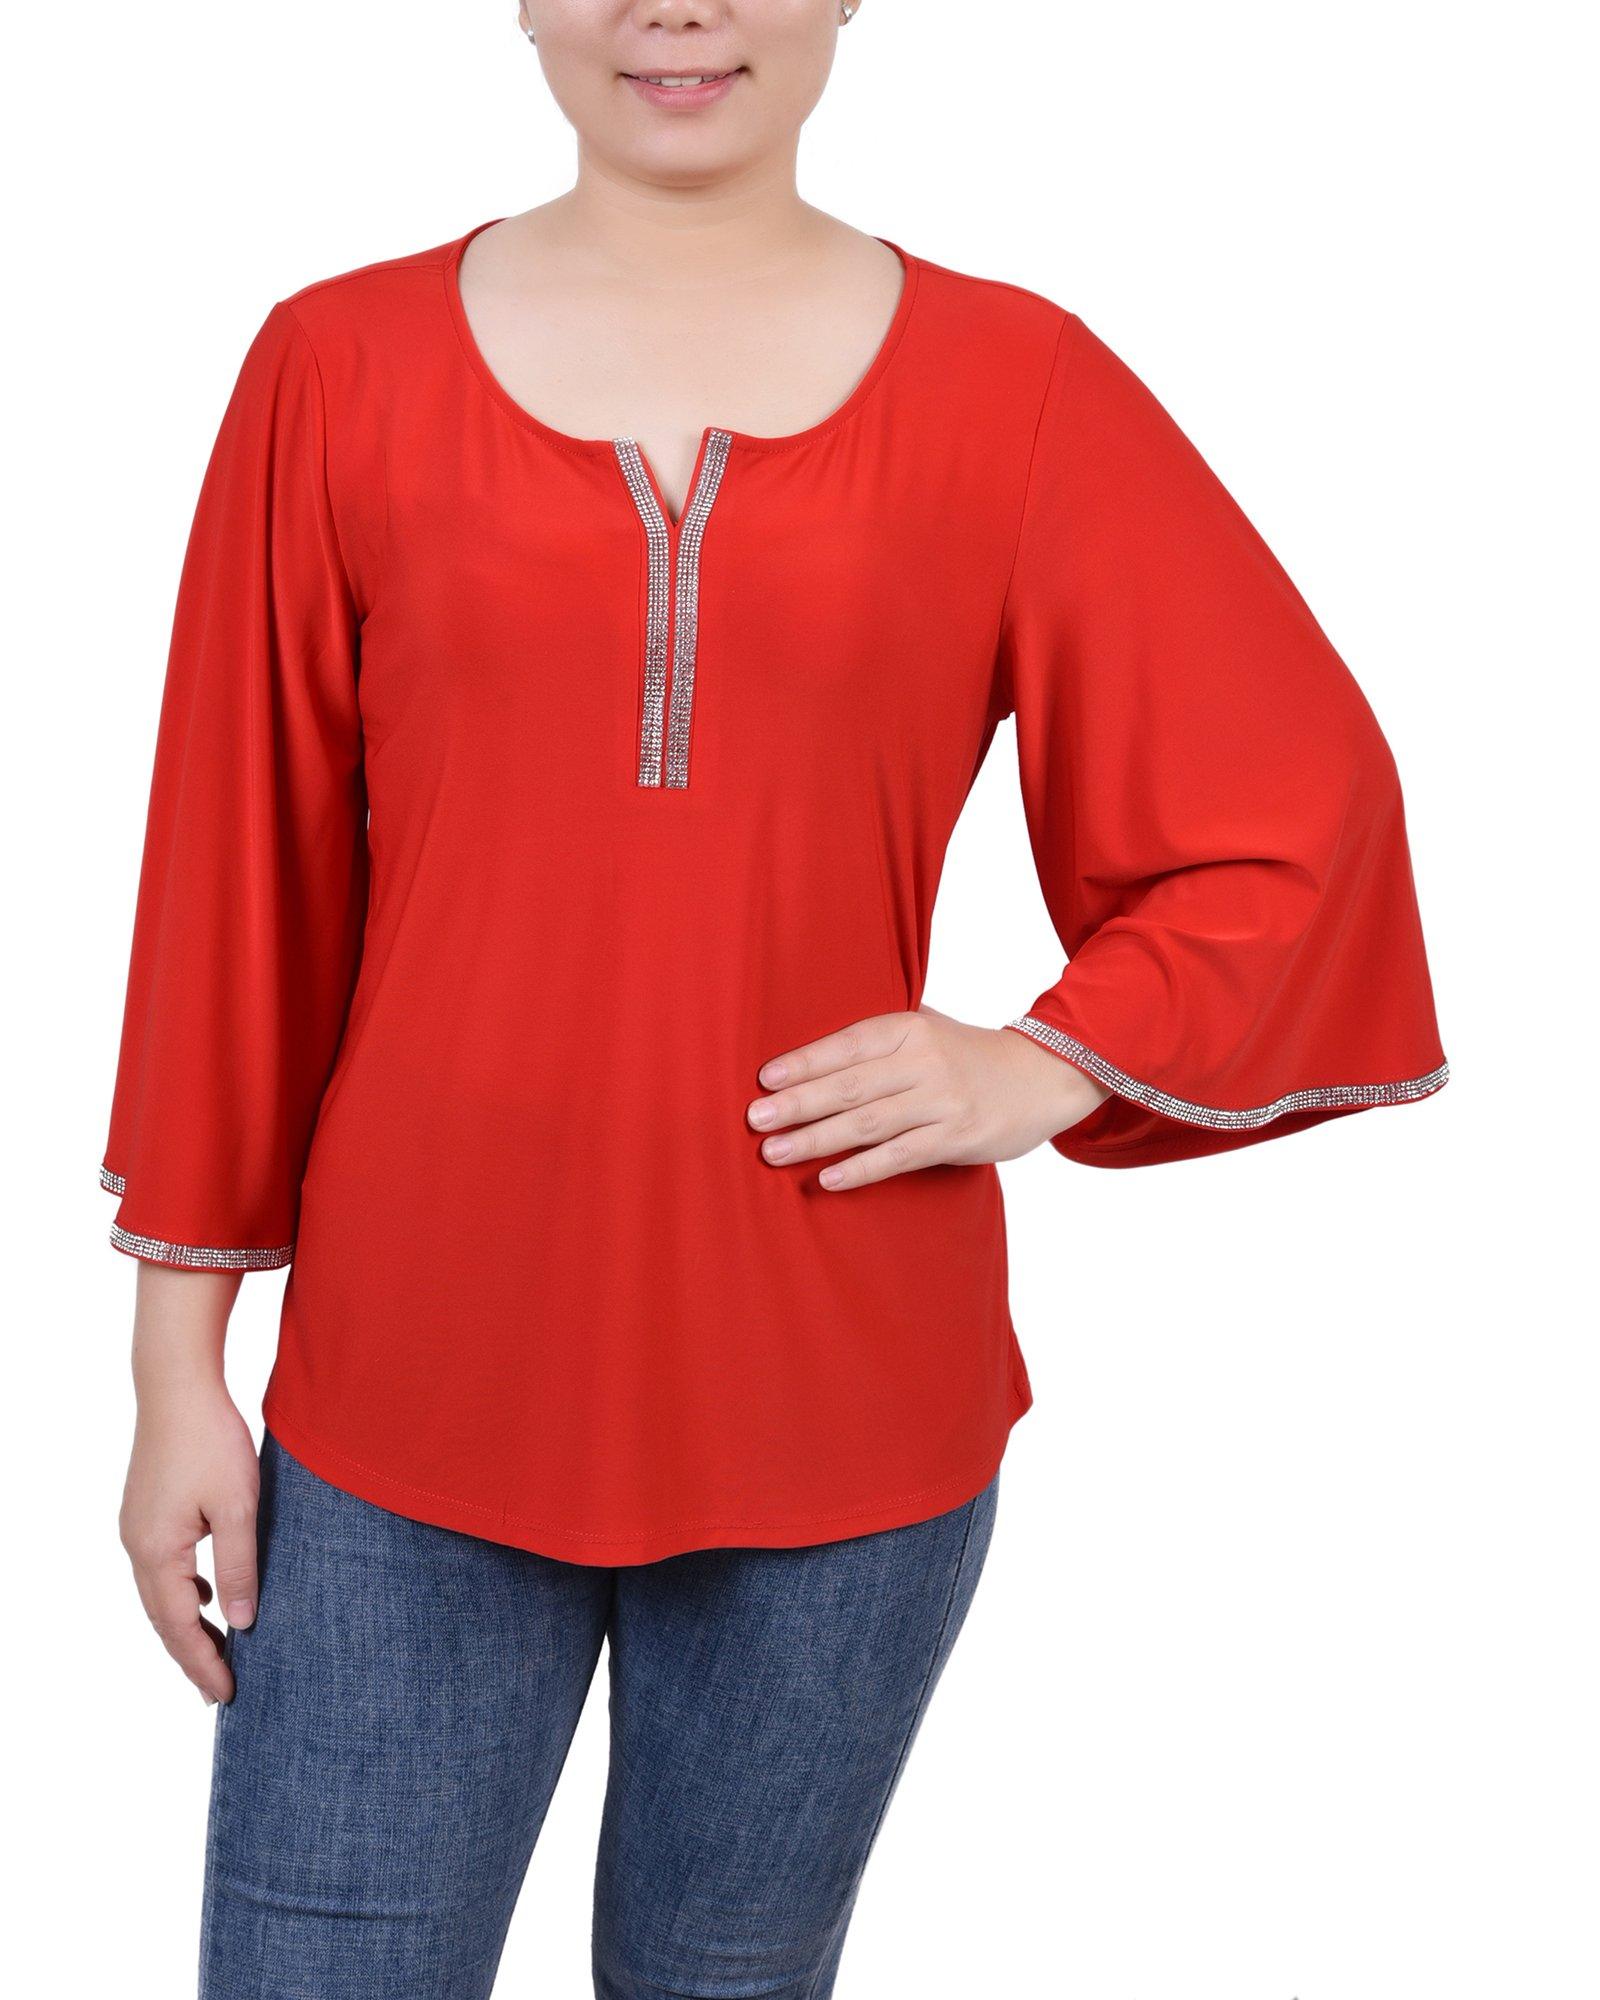 NY Collection Womens Petite 3/4 Bell Sleeve Top